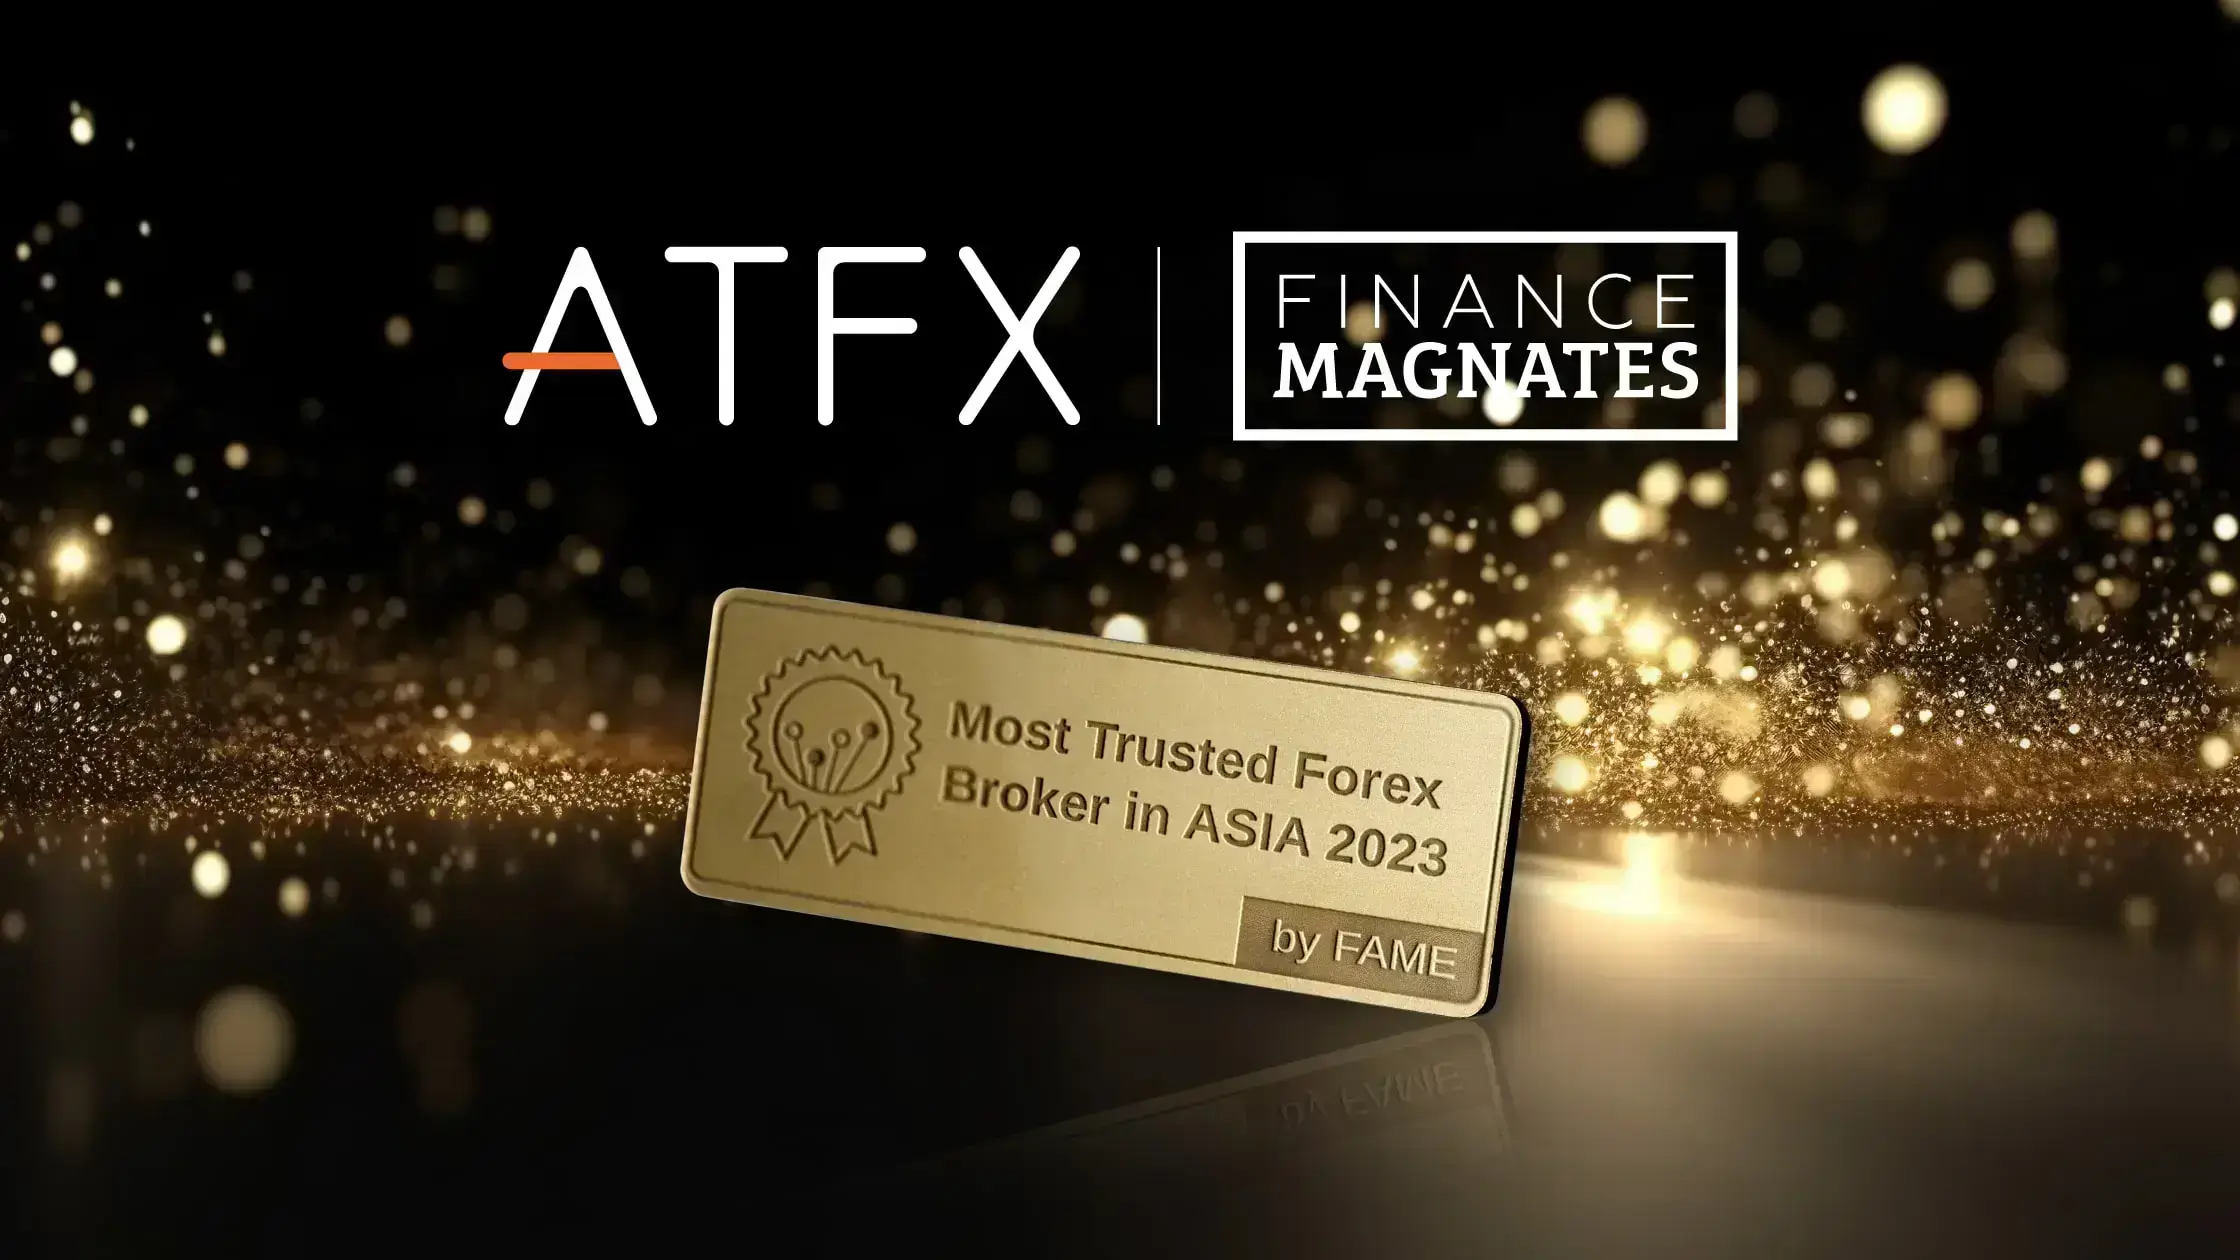 atfx-most-trusted-forex-broker-asia-2023-1